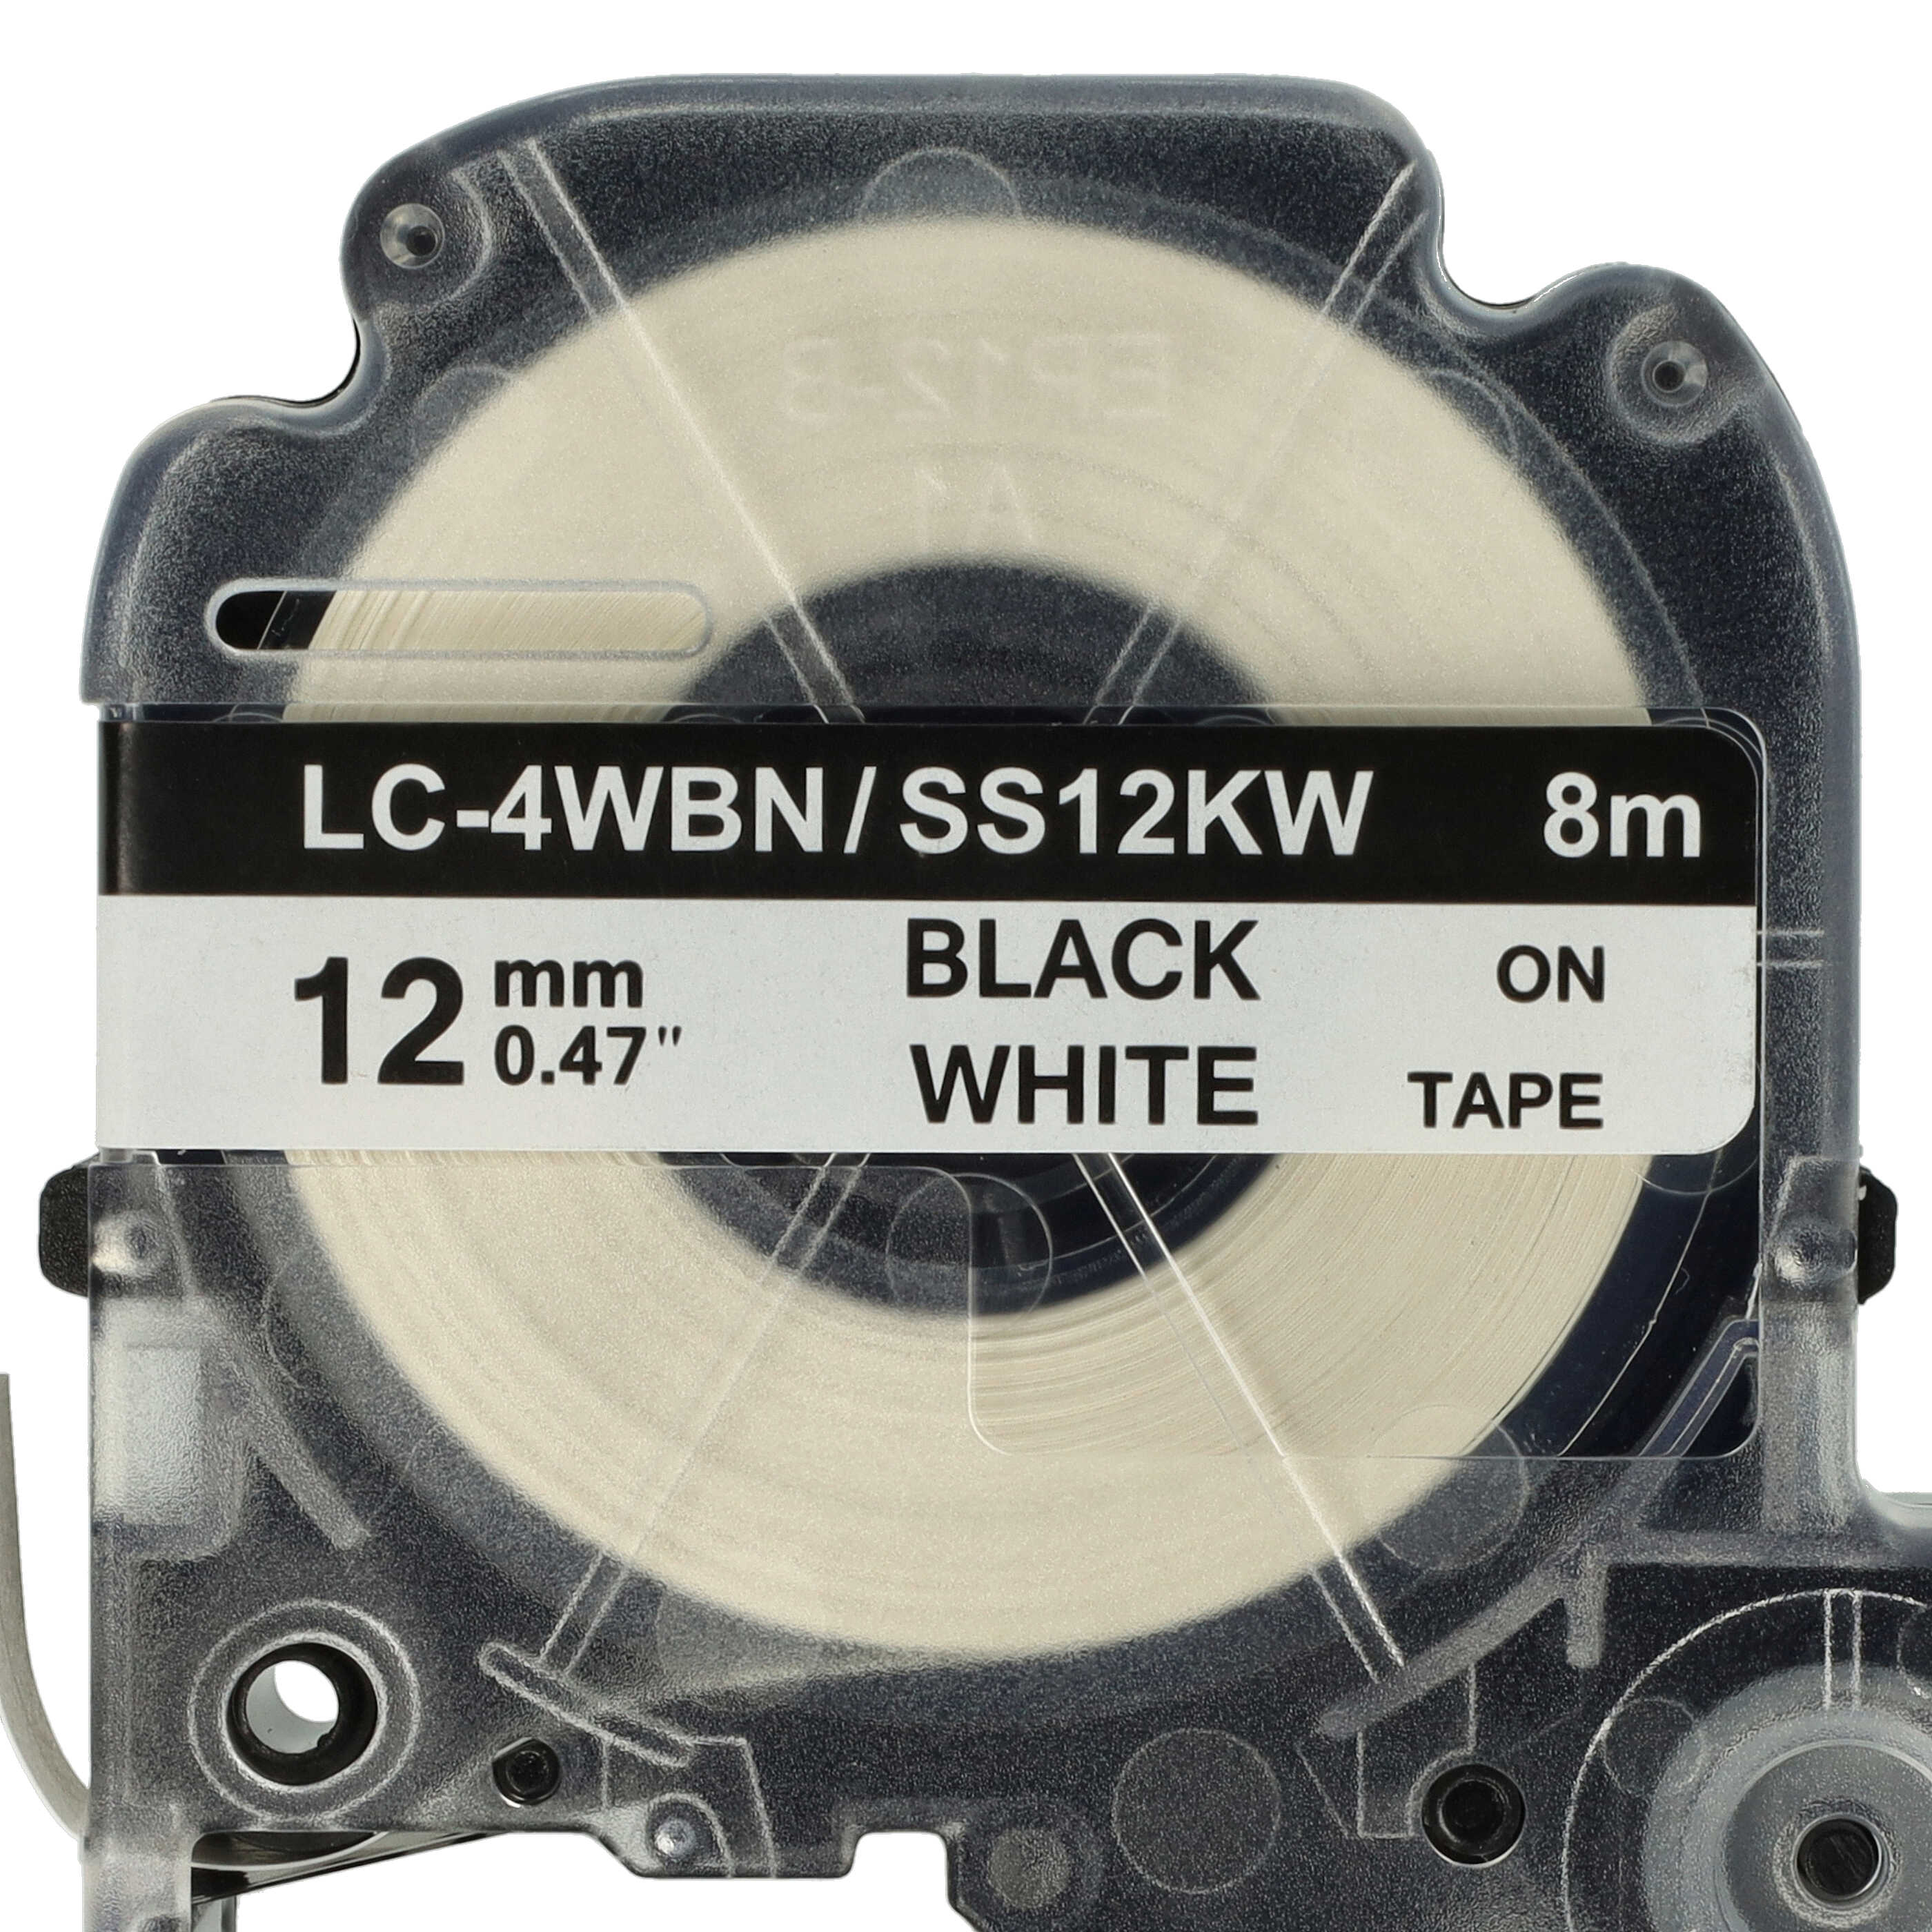 2x Label Tape as Replacement for Epson SS12KW, LC-4WBN - 12 mm Black to White